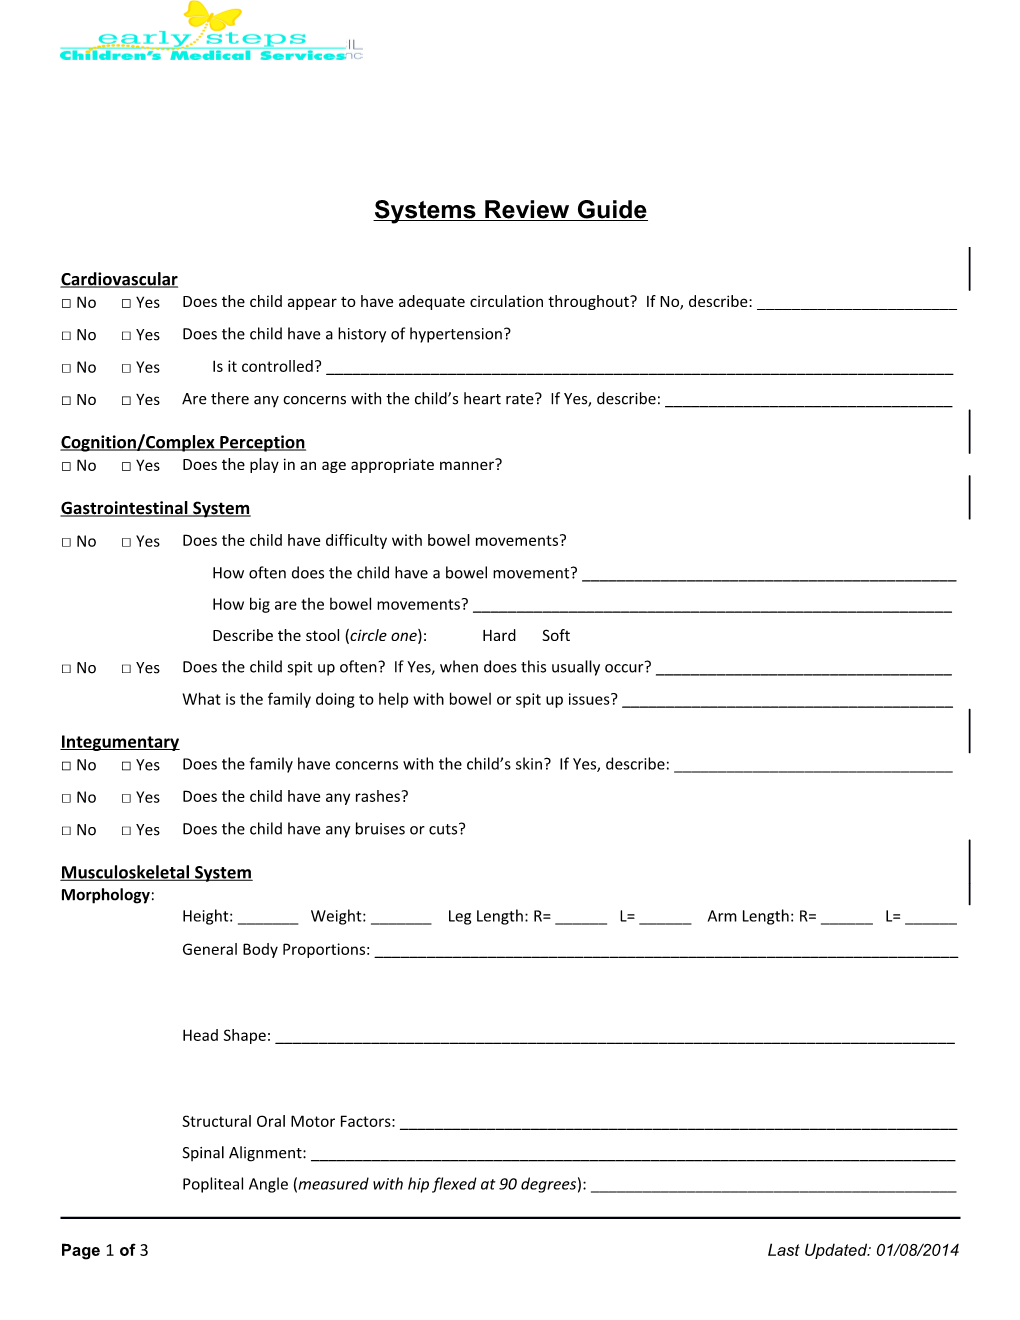 Systems Review Guide